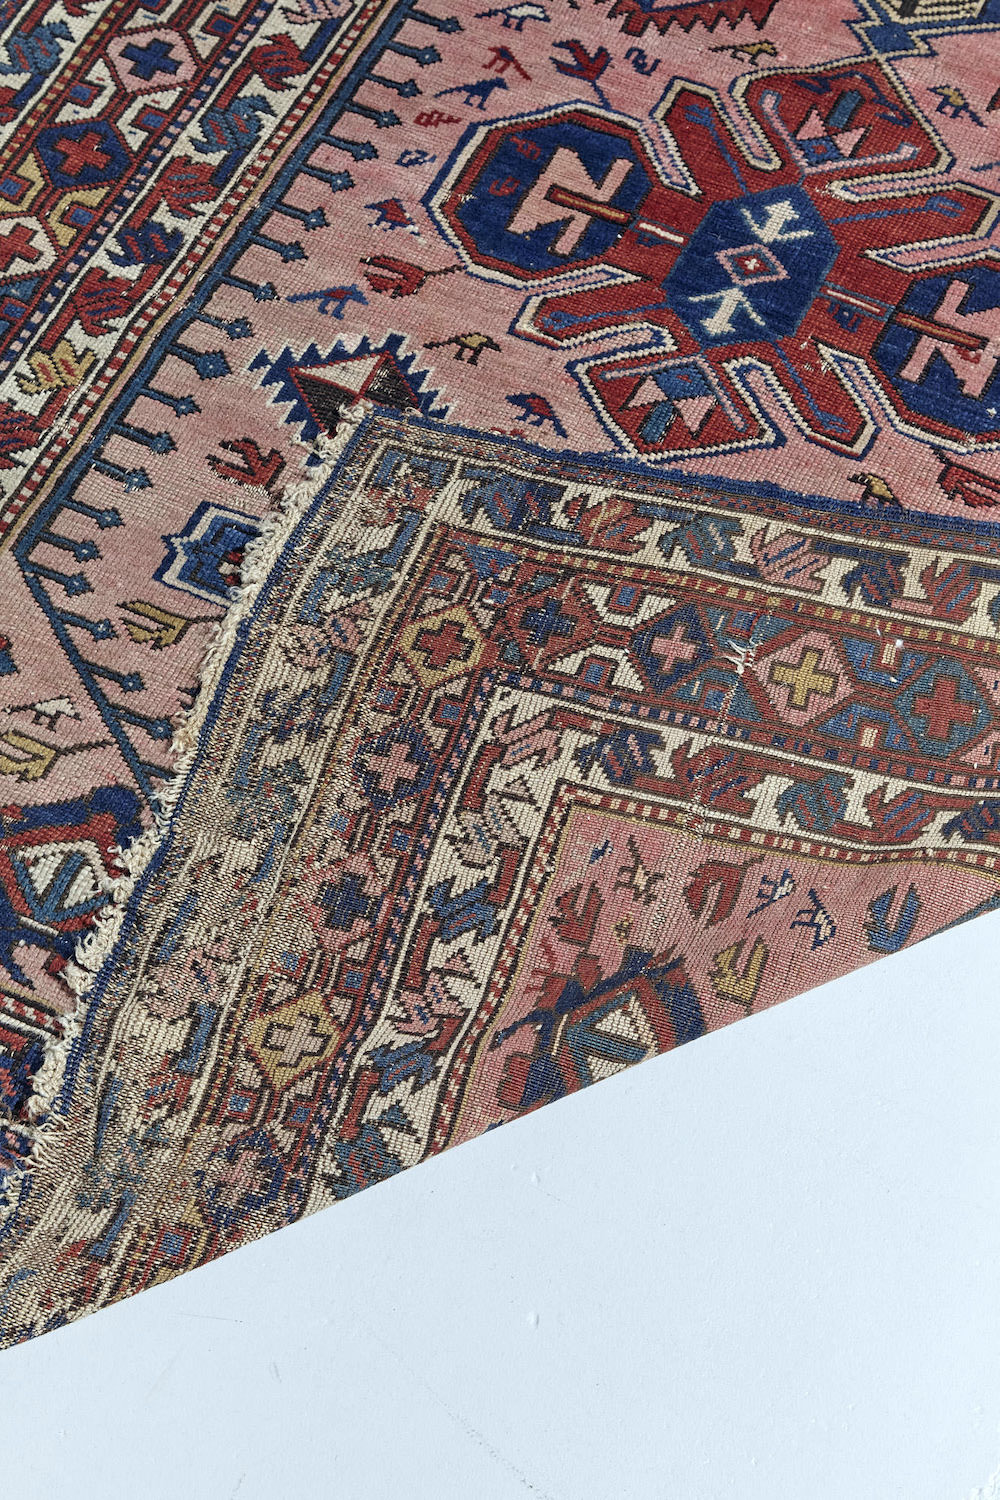 Antique Persian Caucasian rug in pale pink with deep red and blue designs throughout. Perfect for a bedroom, study, kitchen or living room. Available from King Kennedy Rugs Los Angeles